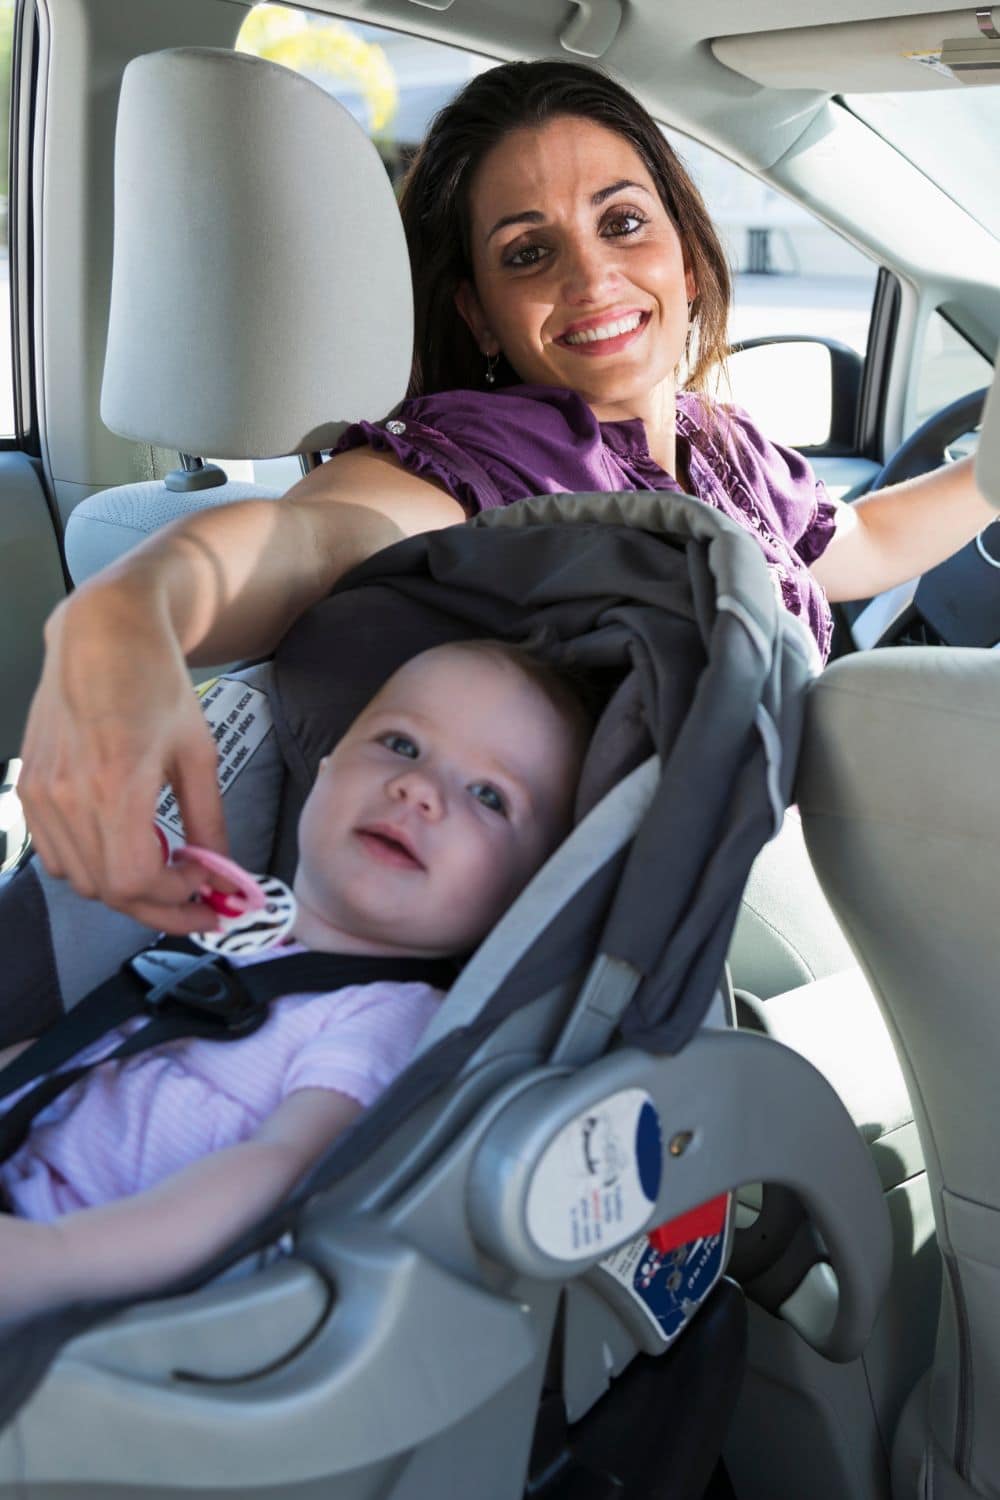 6 Safe Driving Tips for New Parents